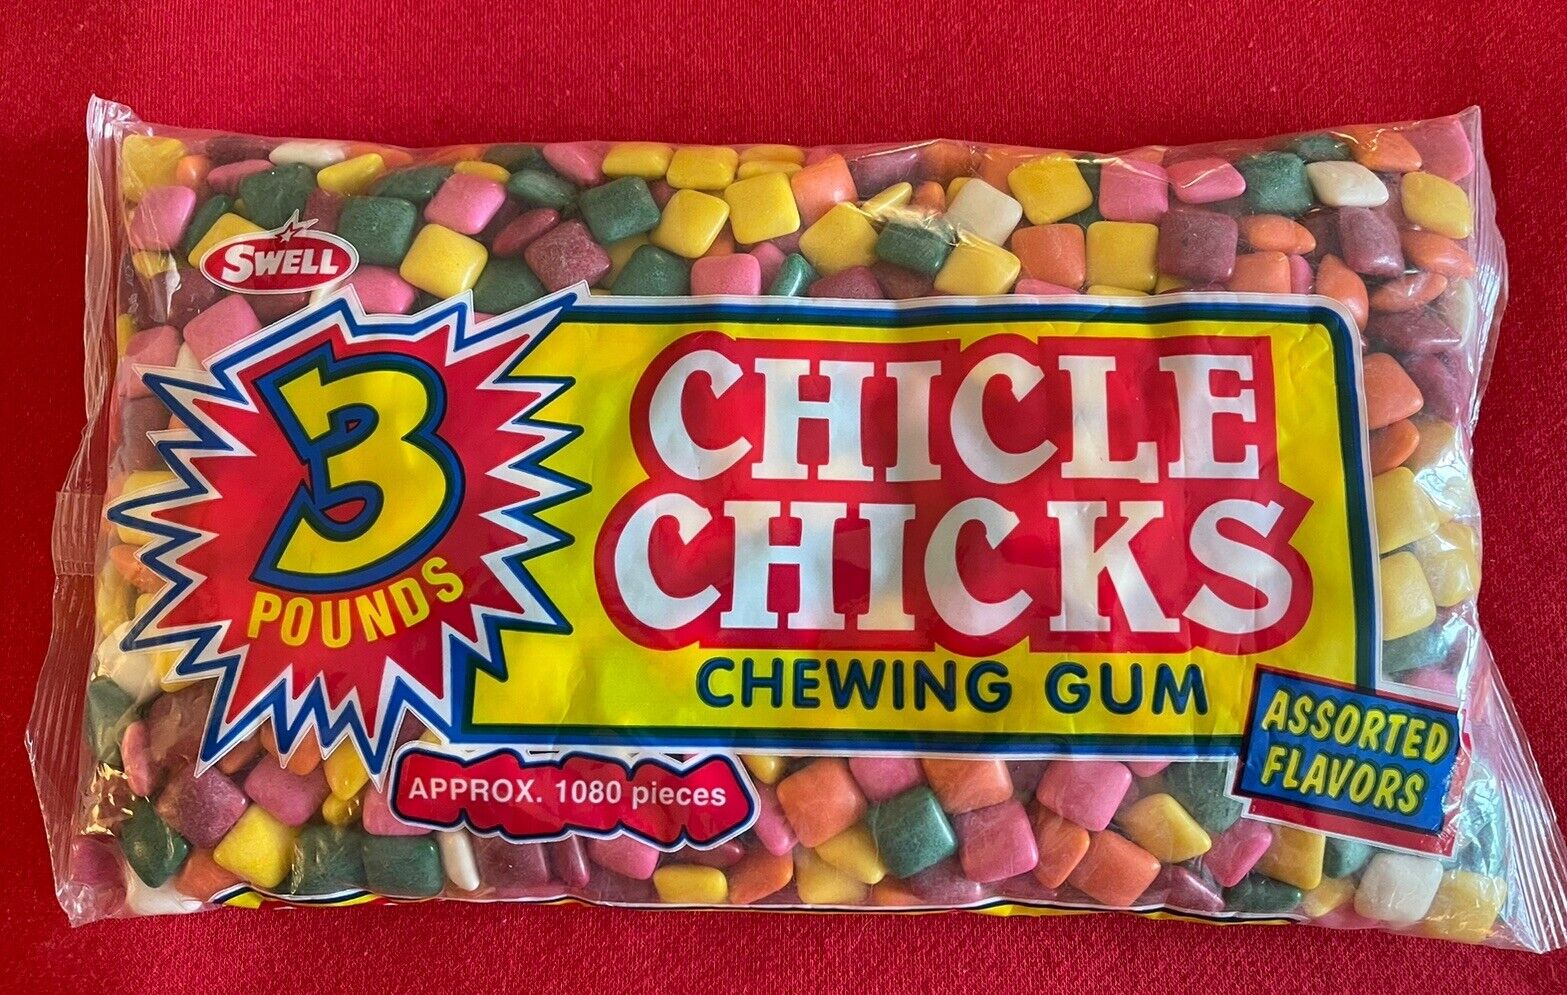 Vintage 1980’s SWELL CHICLE CHICKS CHEWING GUM 1080 Pcs.  NOS